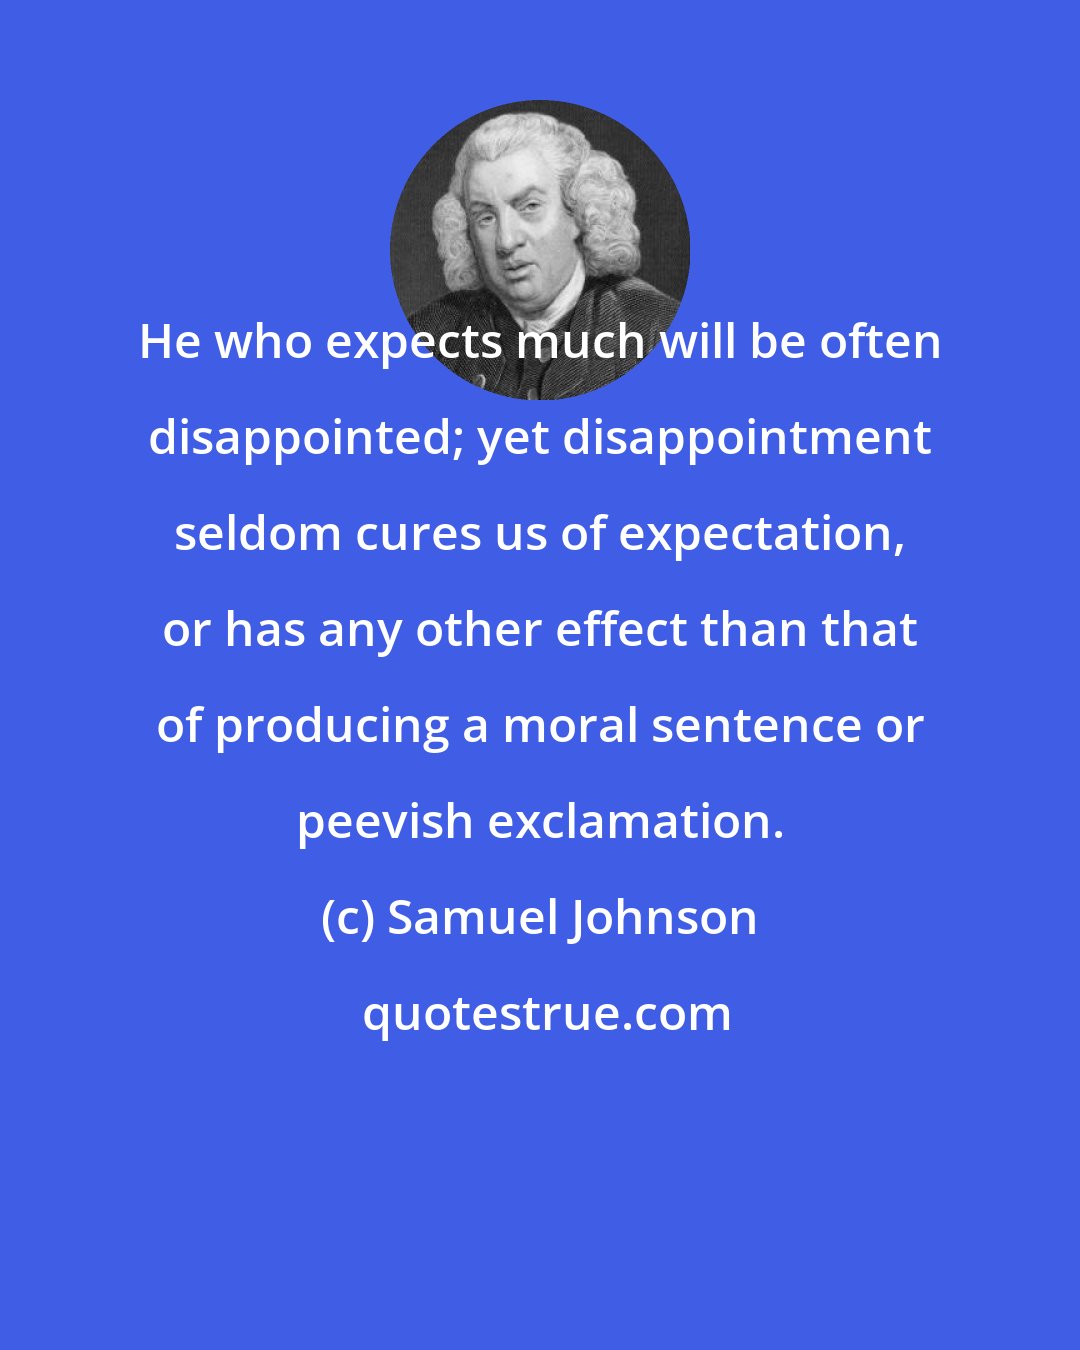 Samuel Johnson: He who expects much will be often disappointed; yet disappointment seldom cures us of expectation, or has any other effect than that of producing a moral sentence or peevish exclamation.